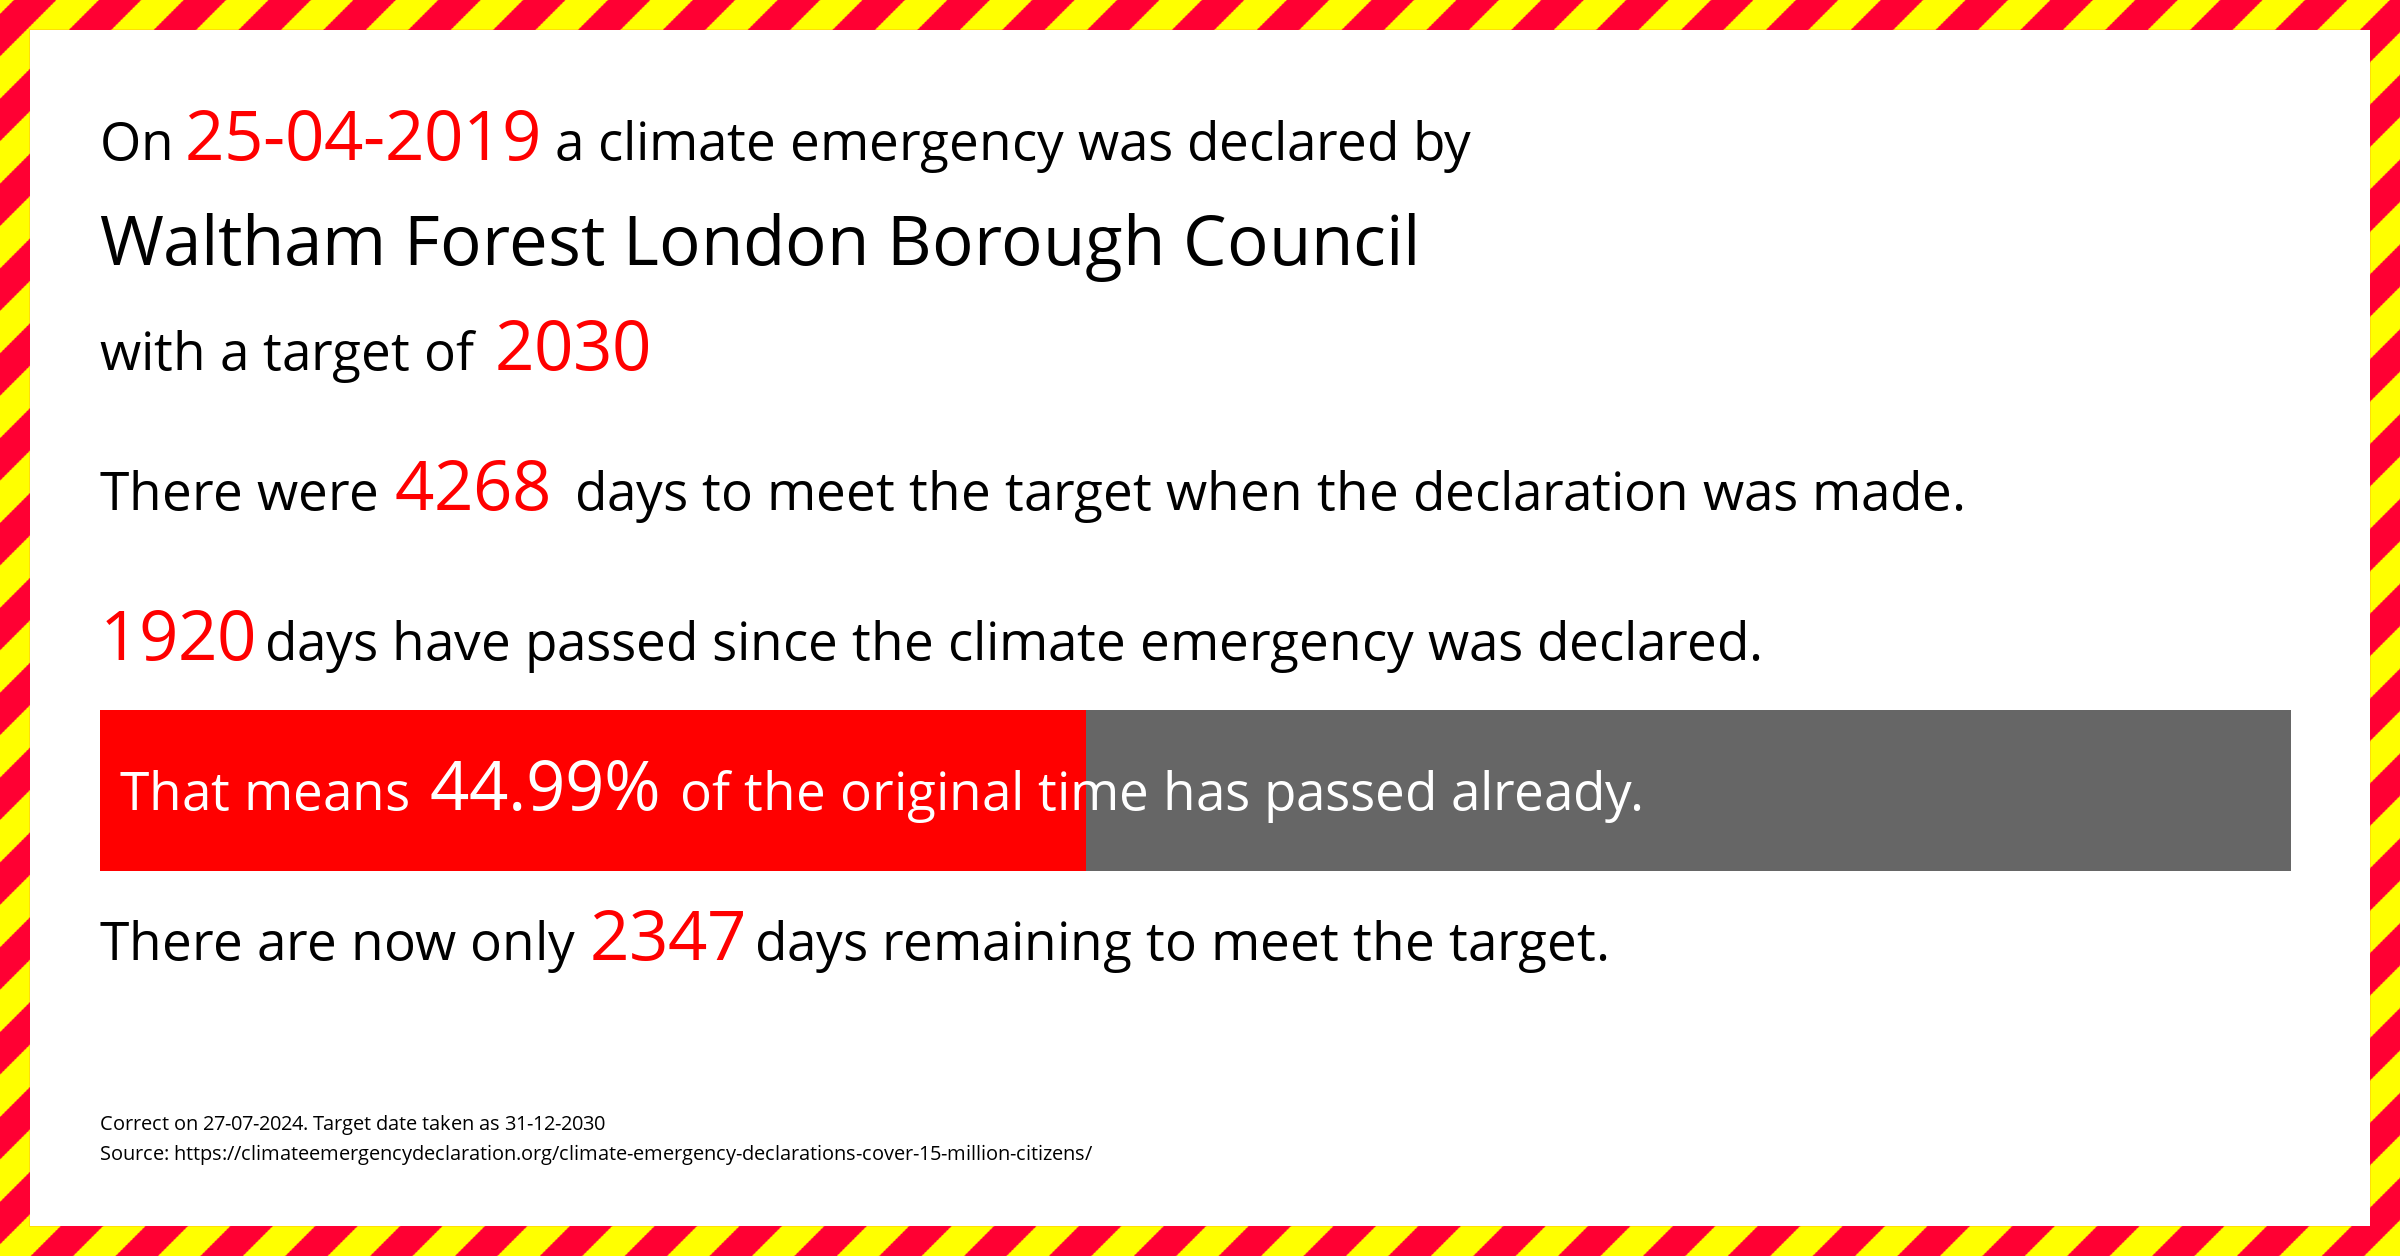 Waltham Forest London Borough Council declared a Climate emergency on Thursday 25th April 2019, with a target of 2030.